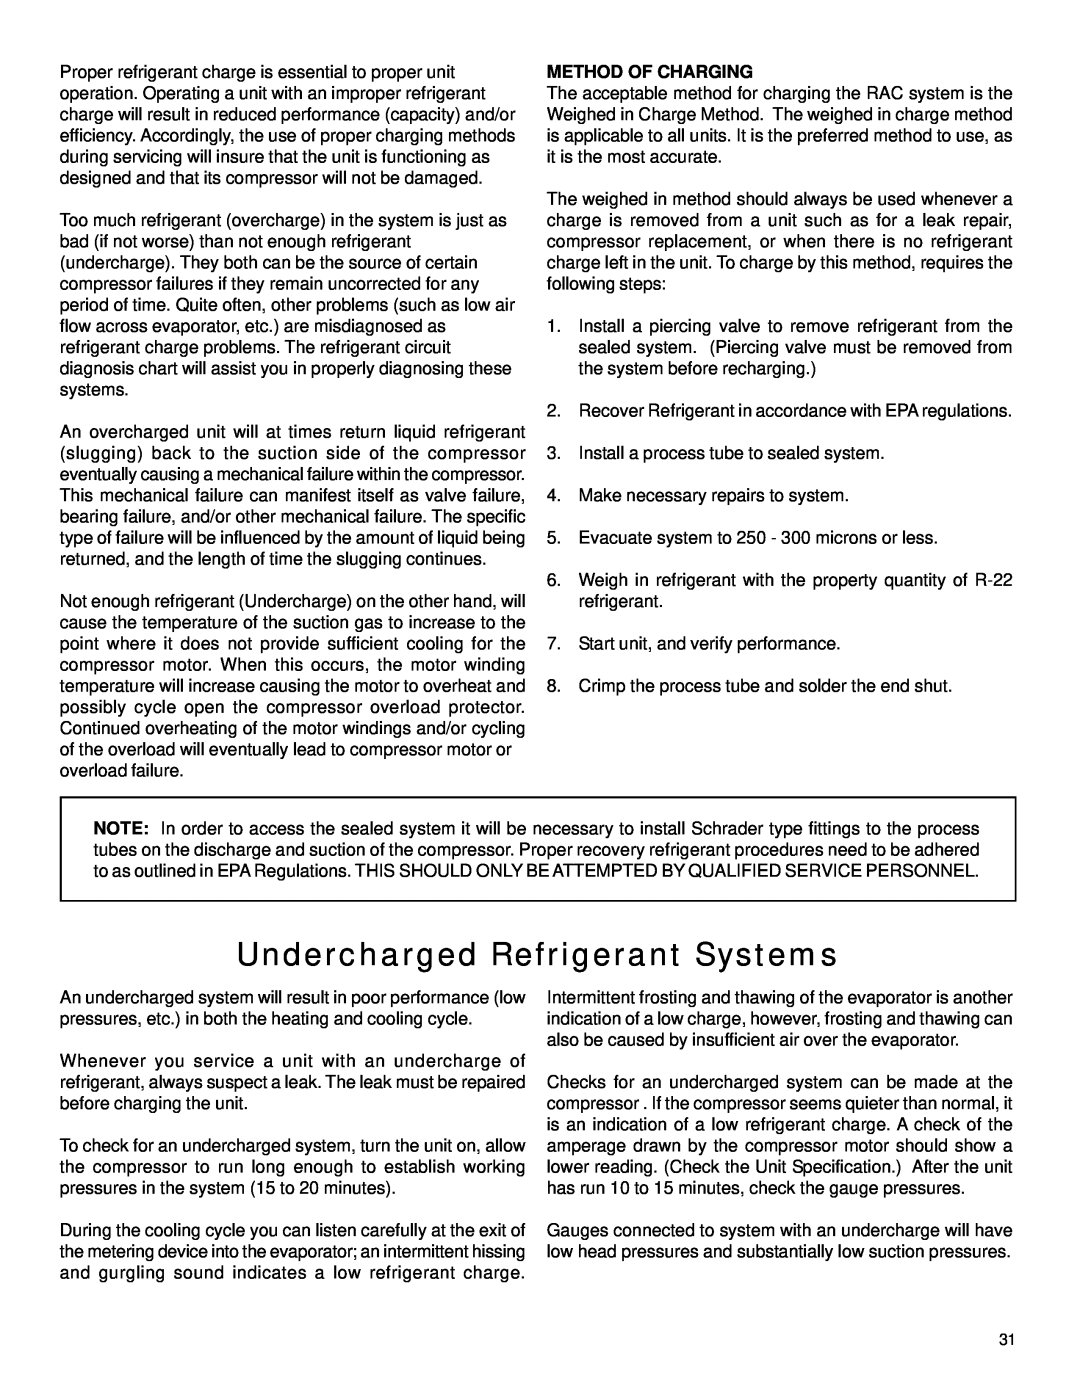 Friedrich 2003 service manual Undercharged Refrigerant Systems, Method Of Charging 